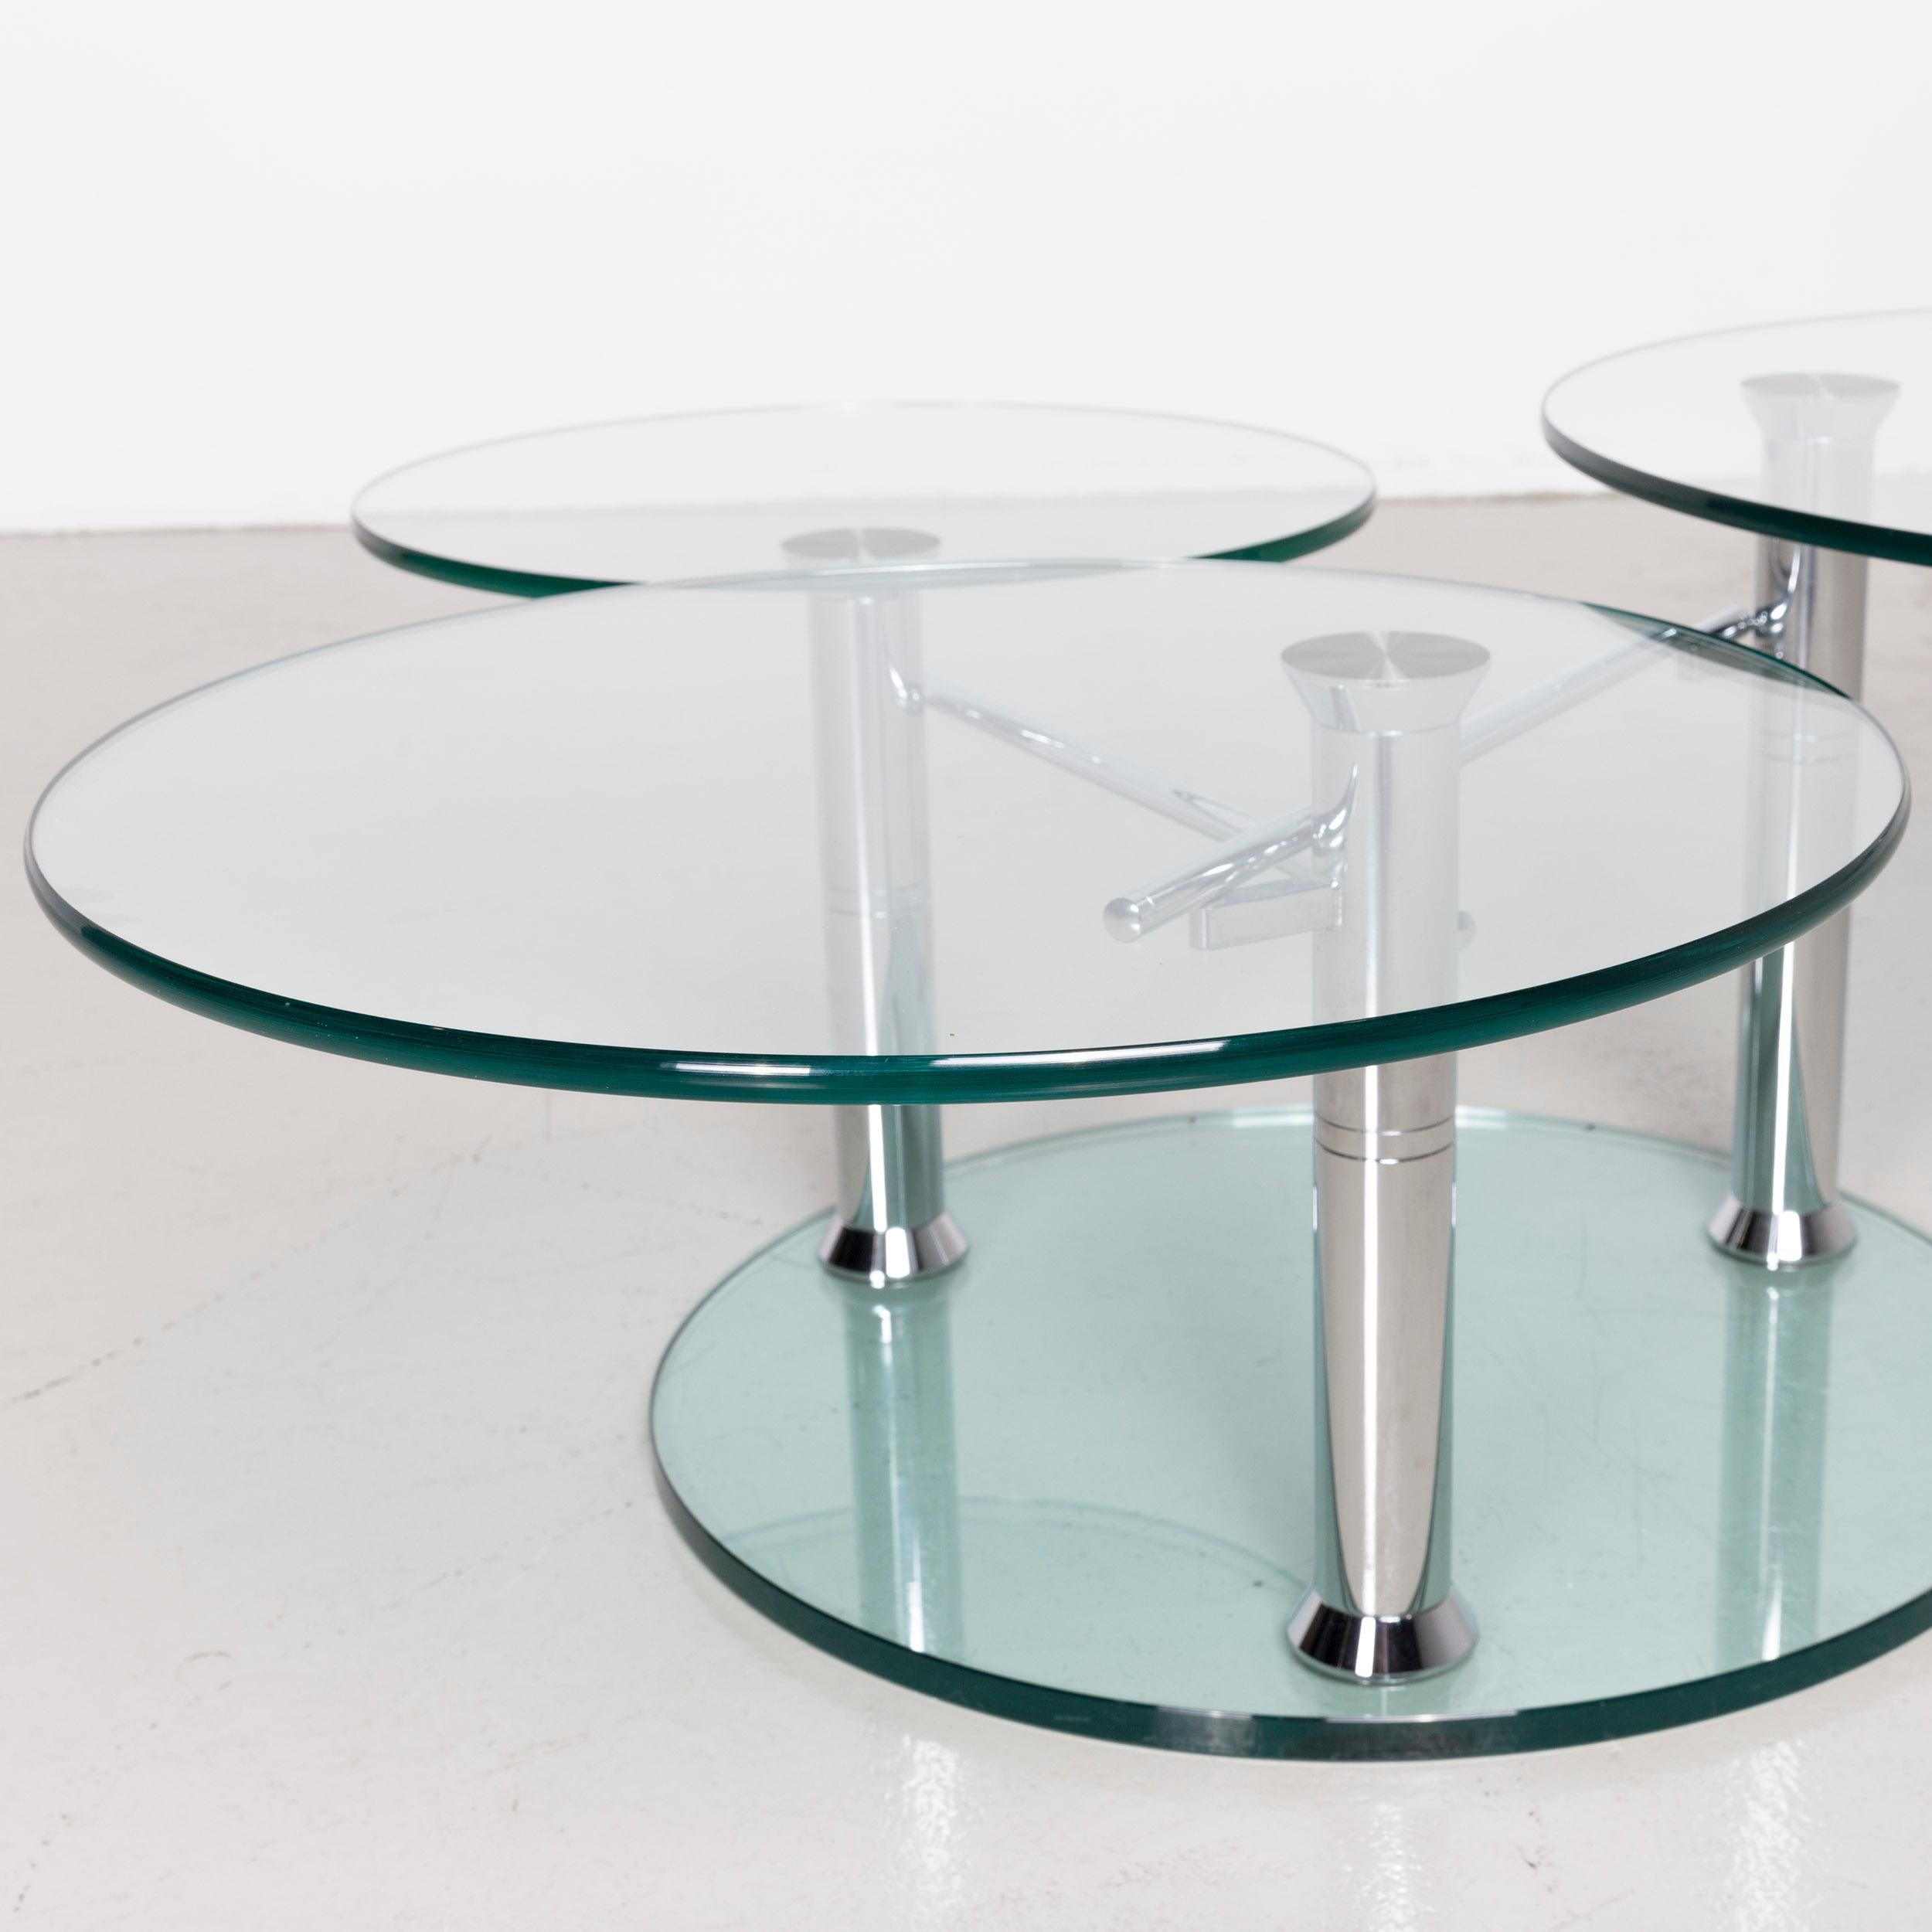 Draenert Intermezzo 1132 Designer Coffee Table Glass by Georg Appeltshaus In Good Condition For Sale In Cologne, DE